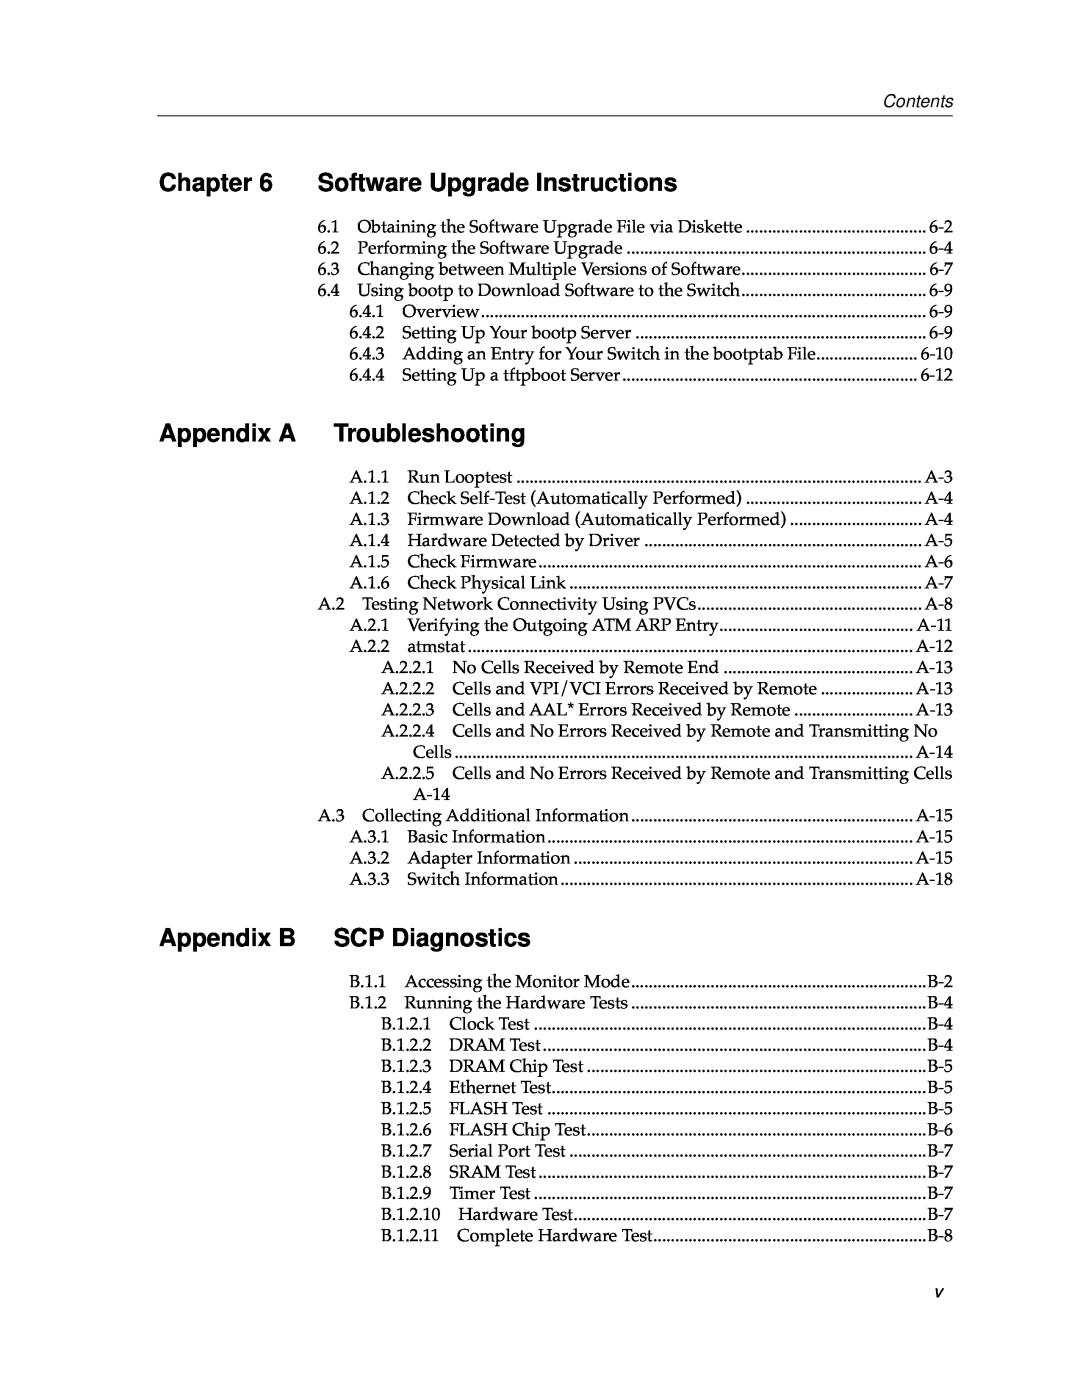 Cabletron Systems 9A000 Software Upgrade Instructions, Appendix A, Appendix B, Chapter, Troubleshooting, SCP Diagnostics 